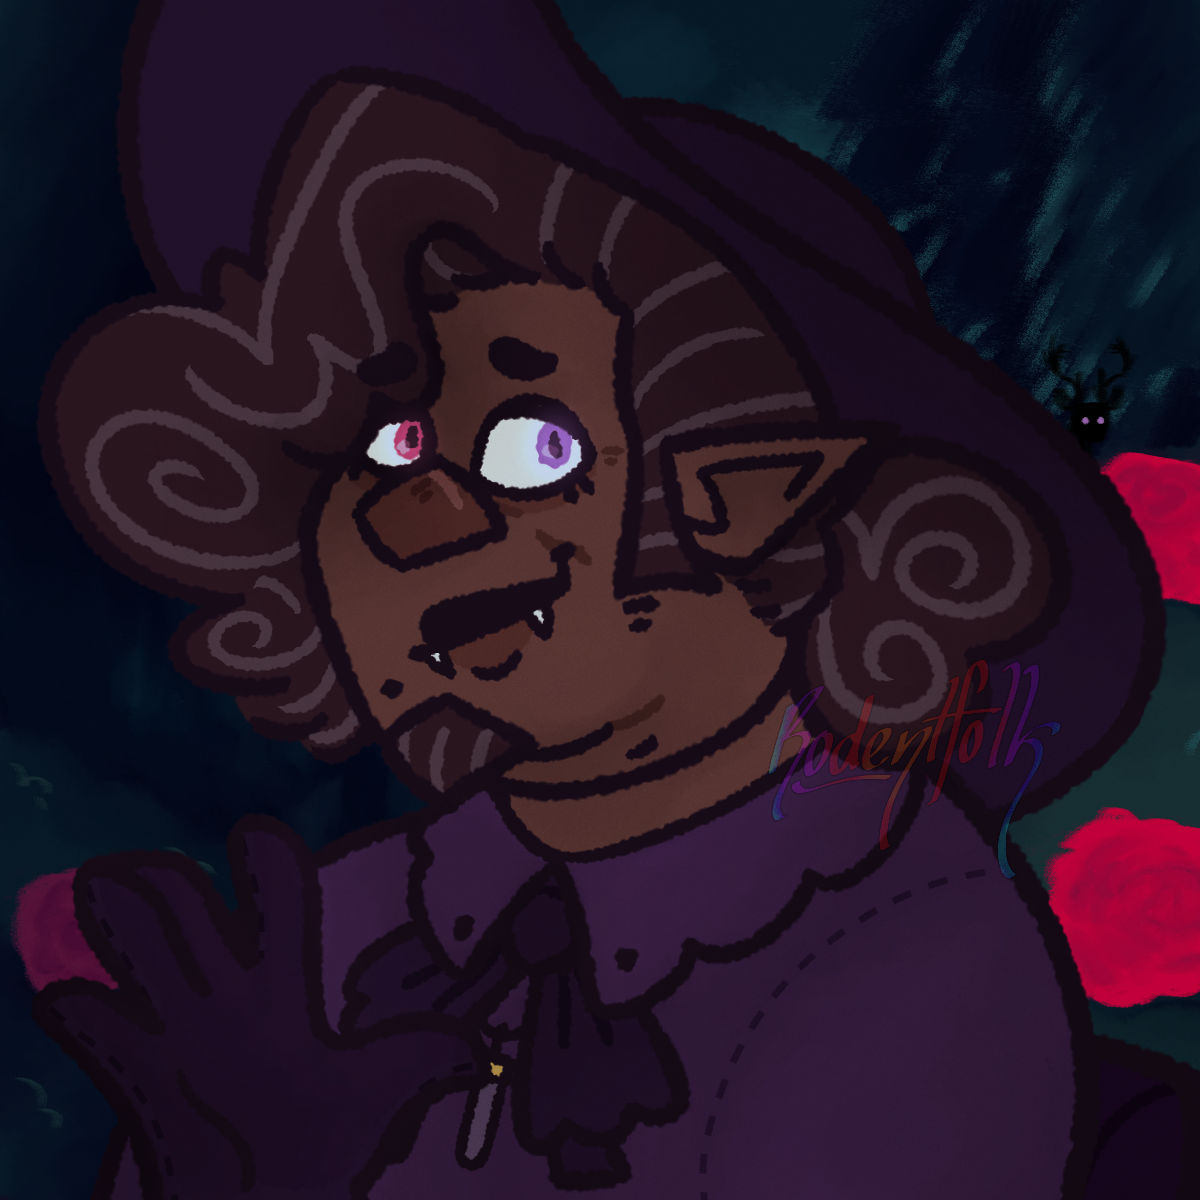 It is an illustration of Nik's OC, Roosevelt. He is a dark-skinned vampire with pink and purple eyes, a scar across his nose, a mole under the left side of his lip, and greying brown hair style into a big heart-shaped bun at the back, with sideburns and a goatee. He wears a lavender shirt with a dark purple hat, gloves and shirt-bow. He also wears a necklace with a glass vial attatched to it. He is sitting in a wheelchair, sadly smiling at the camera with one hand open in a waving gesture. The background shows a cool-toned forest environment, with bushes of roses behind him, and a silhouette of a deer with bright purple eyes in the distance.